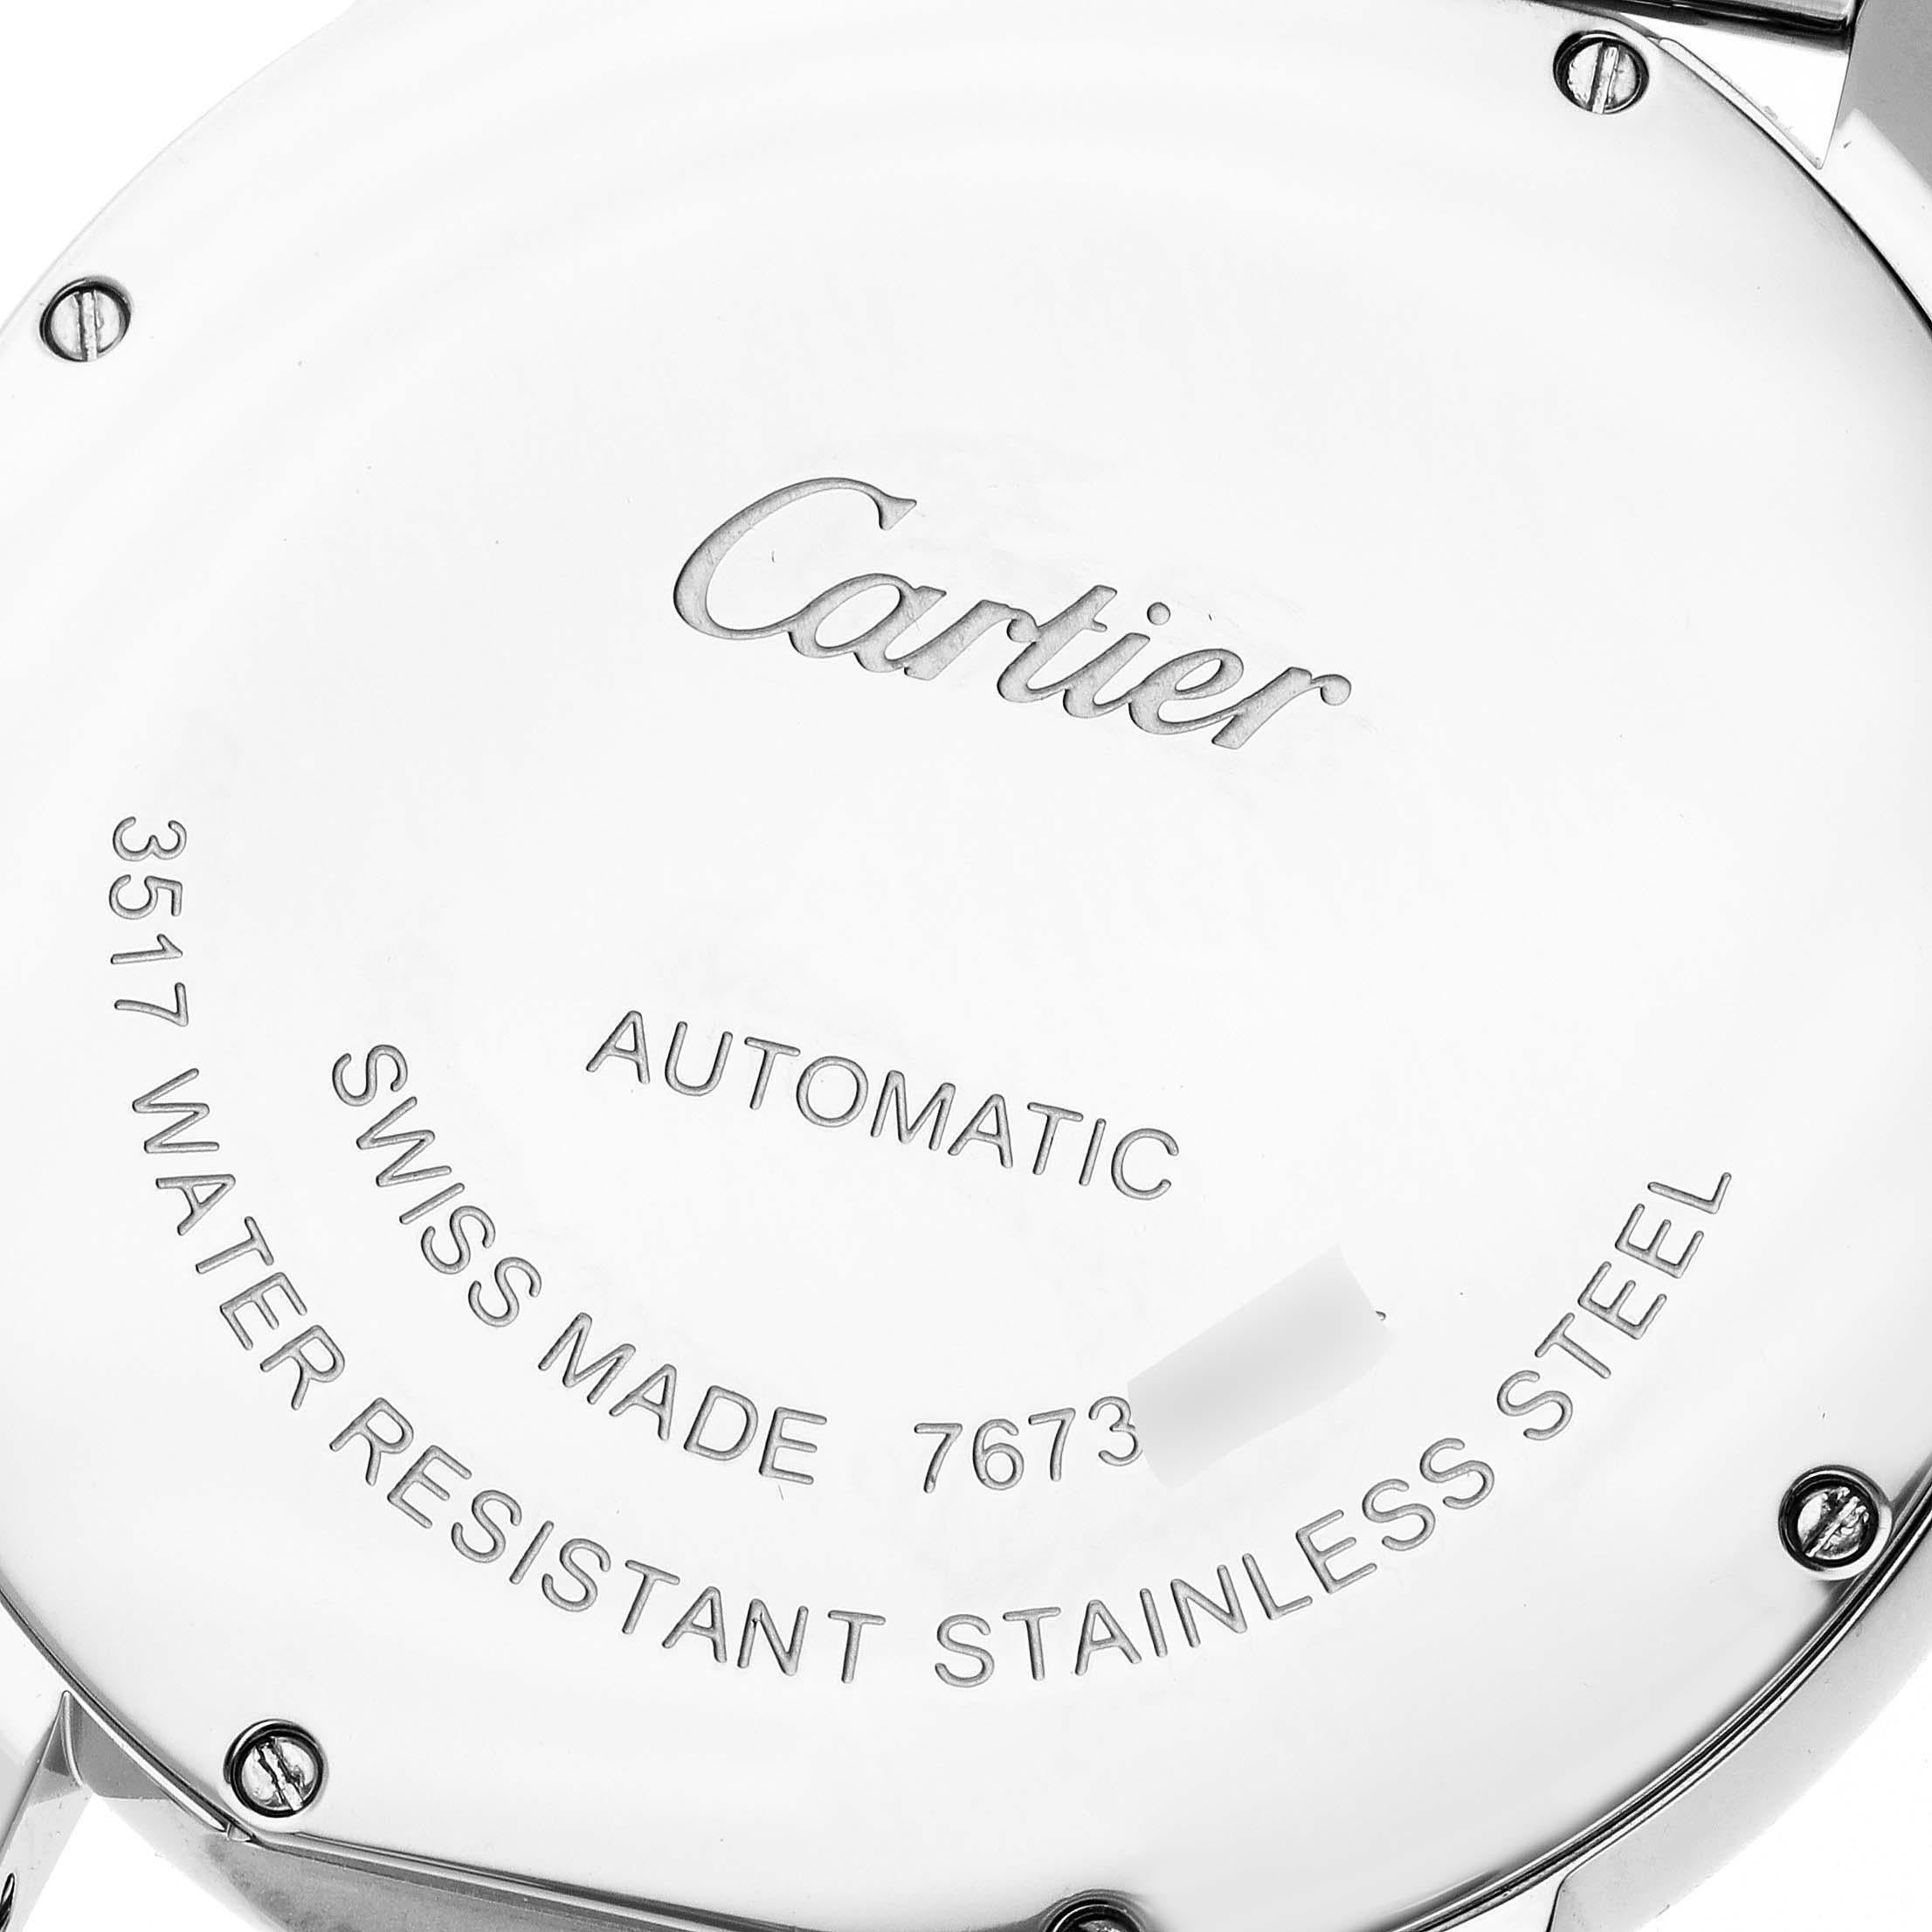 Cartier Ronde Solo XL Silver Dial Automatic Steel Mens Watch W6701011. Automatic self-winding movement. Stainless steel case 42.0 mm in diameter. Circular grained crown set with the blue spinel cabochon. . Scratch resistant sapphire crystal.